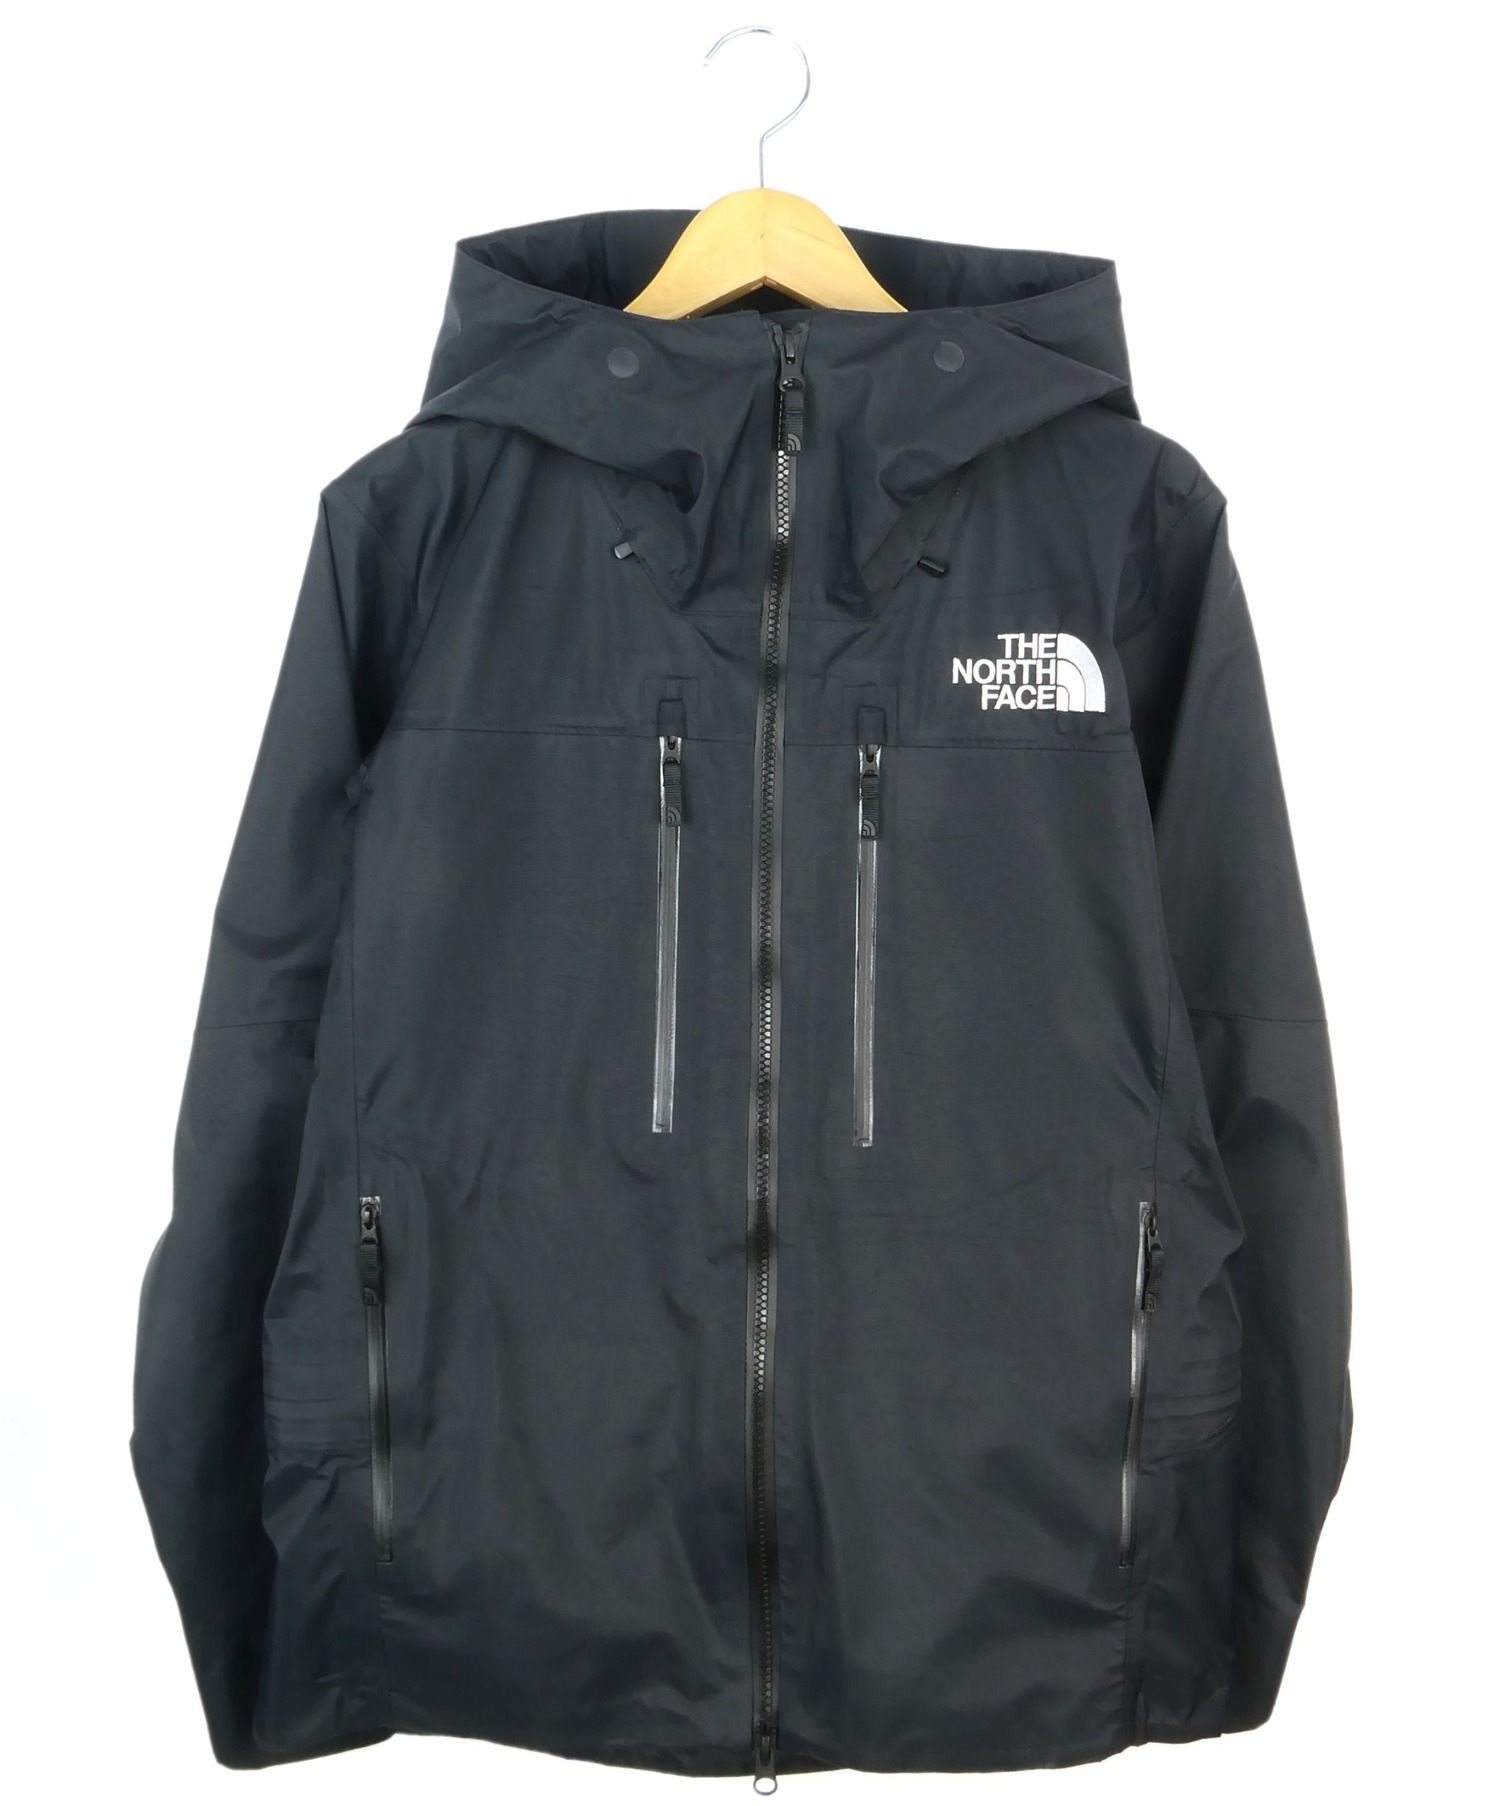 THE NORTH FACE BEAMS MULTIDOORSY INSULATED JACKET ノースフェイス